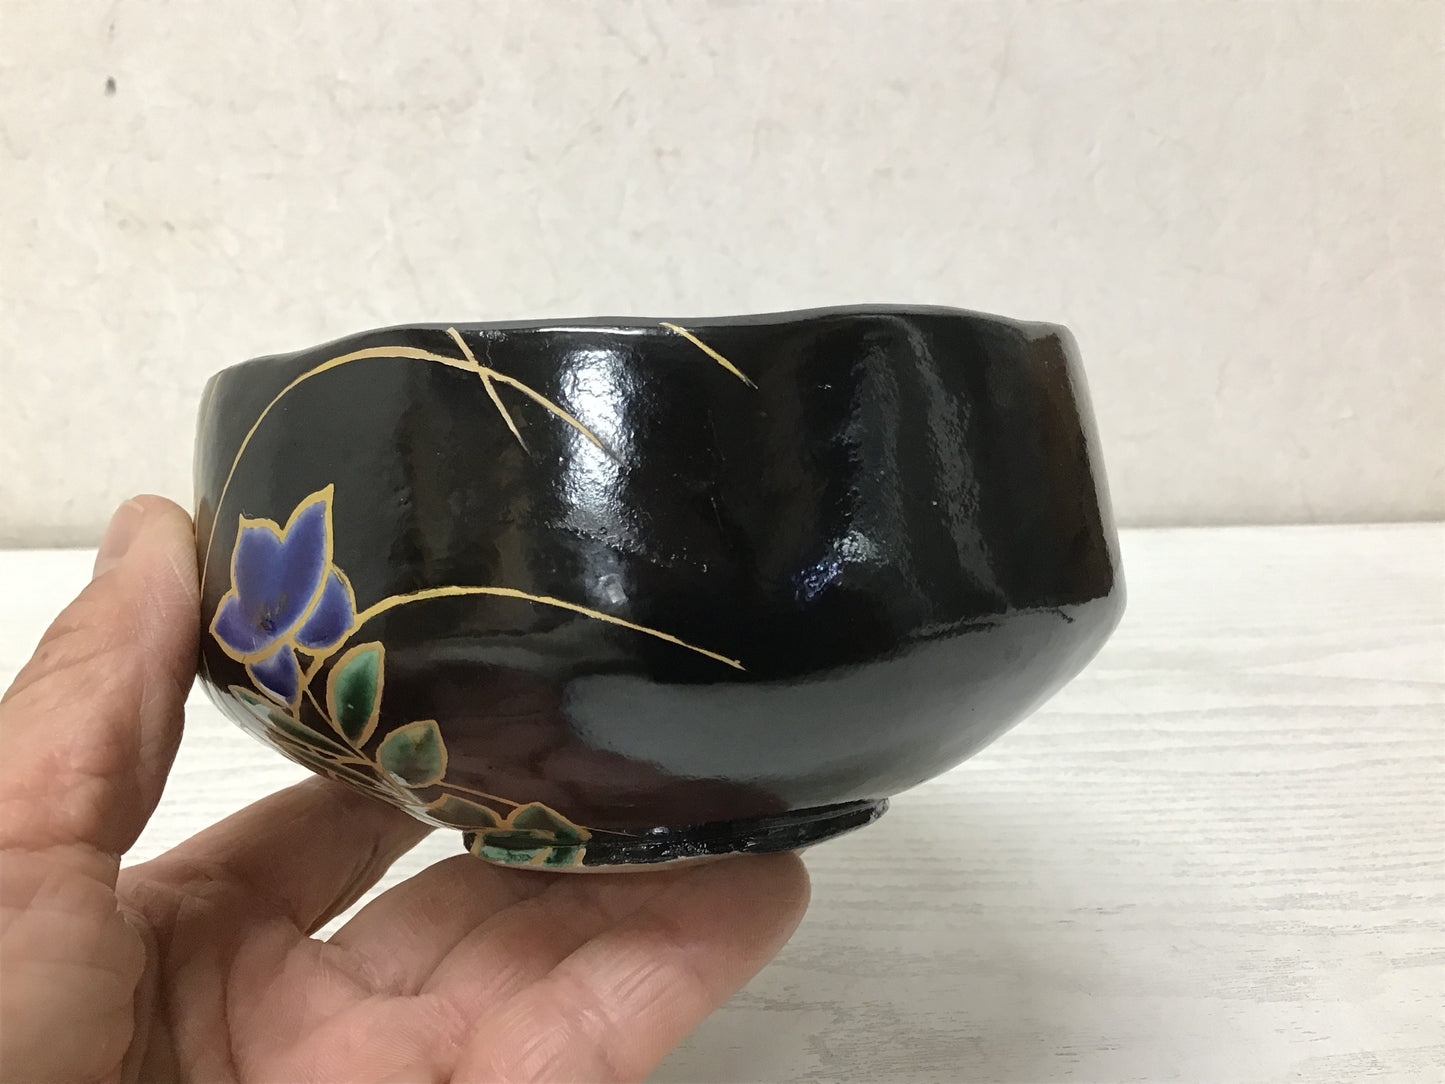 Y2328 CHAWAN Kyo-ware signed box Japan pottery antique tea ceremony bowl